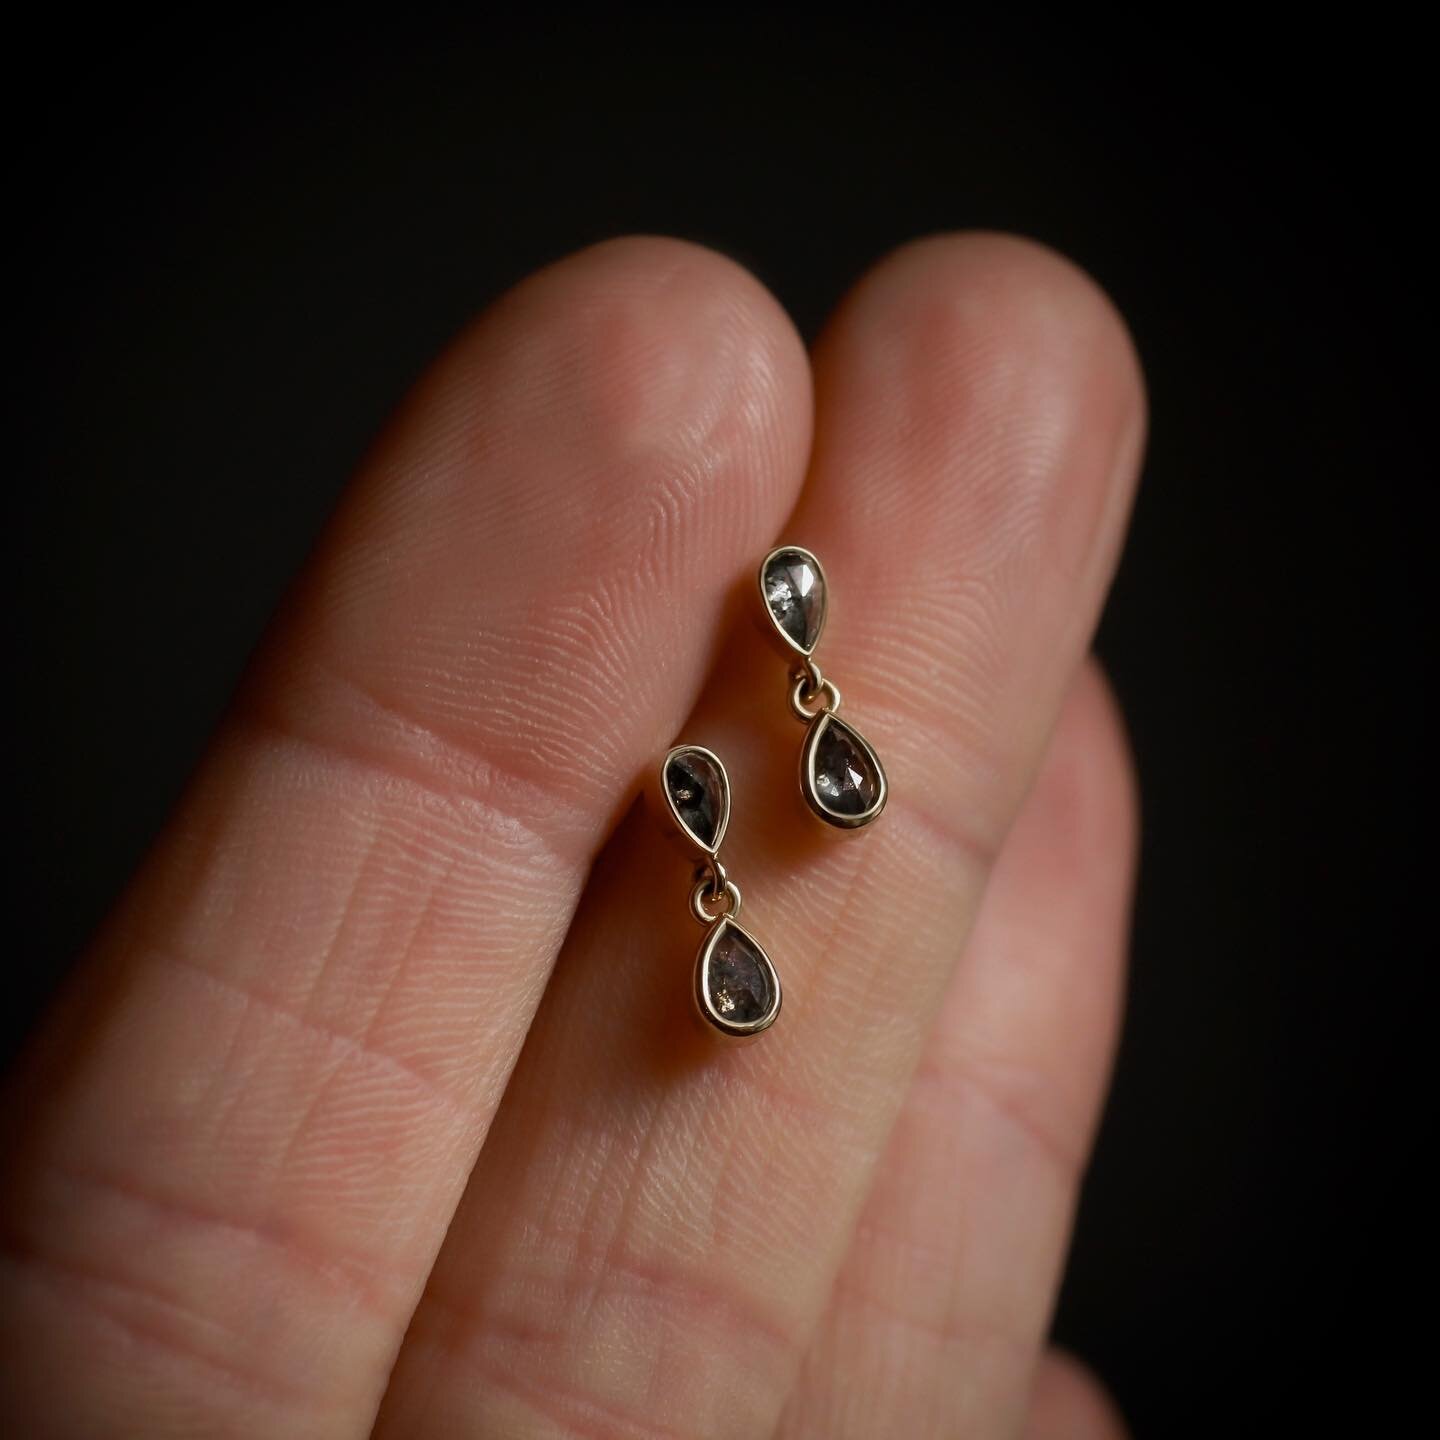 Set with gorgeous salt and pepper rose cut diamonds, these &lsquo;Graphite&rsquo; drop earrings might be mini in size, but certainly not in charm. Perfect for those that like to wear a dangle but don&rsquo;t want a statement size. Available in yellow